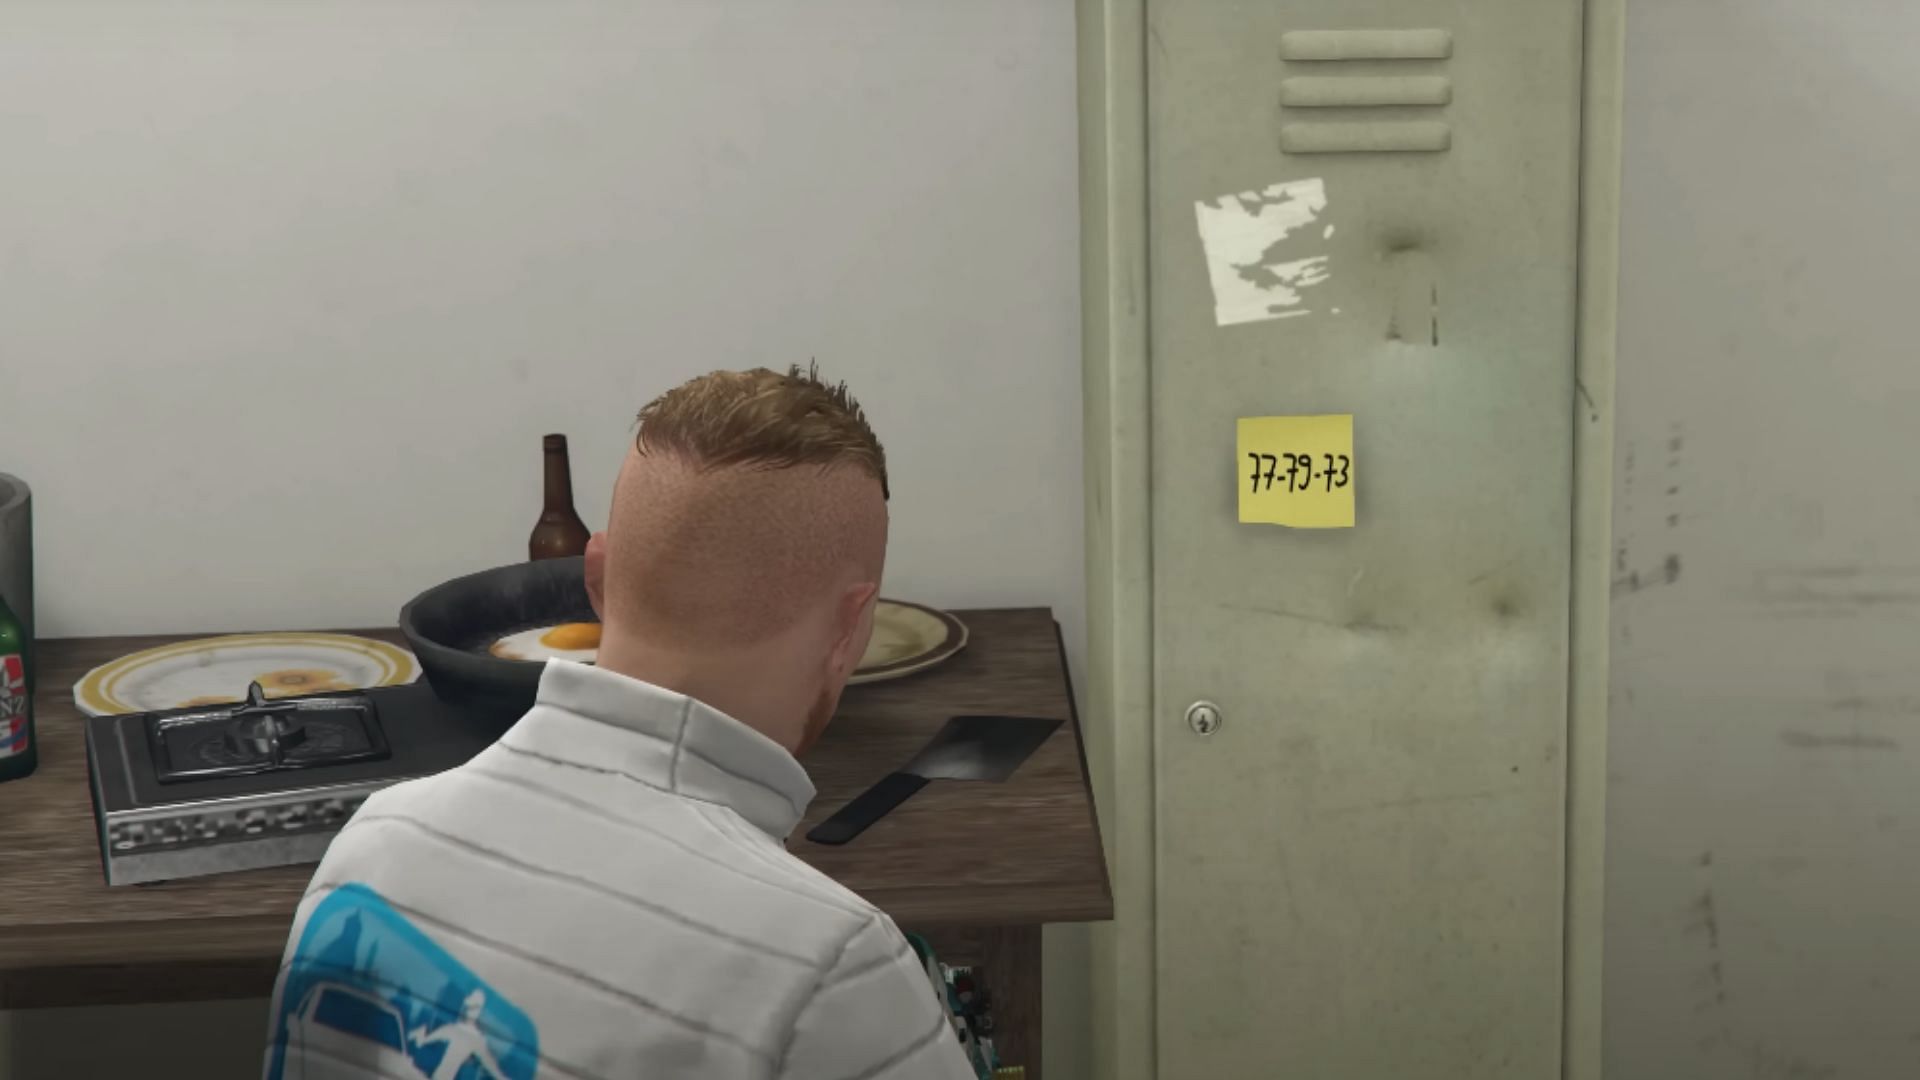 Code for the safe in a Stash House (Image via YouTube @ GTA Series Videos)